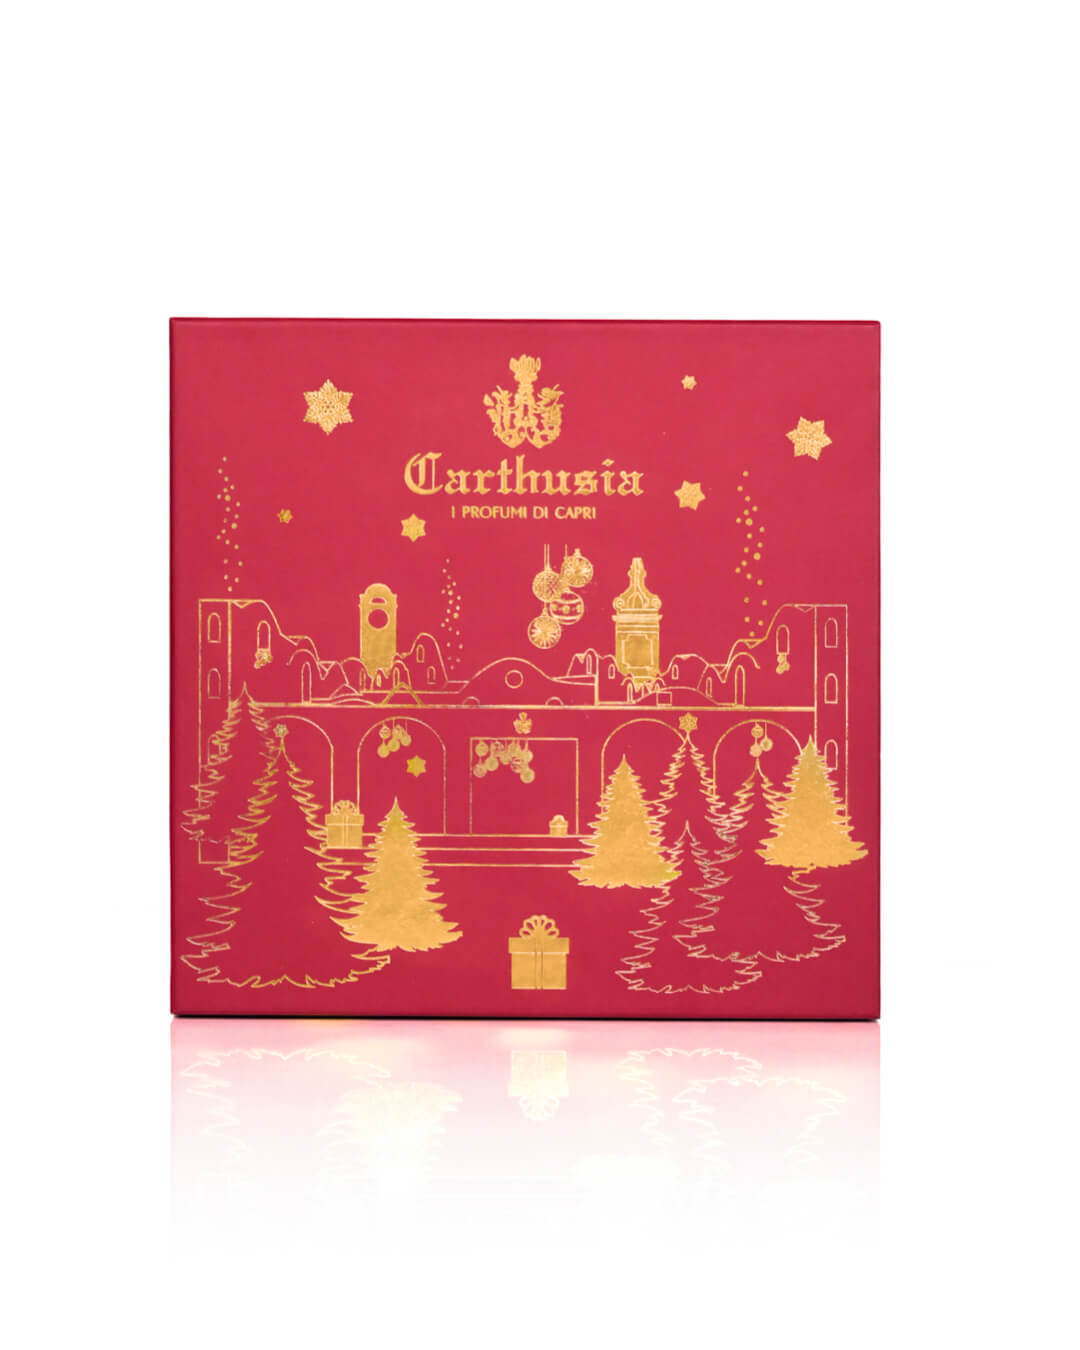 A red holiday-themed luxury Carthusia Christmas Villa Jovis – Fiori di Capri gift box featuring gold illustrations of Christmas trees, gifts, and festive decorations, with the Carthusia I Profumi de Capri brand name prominently displayed.